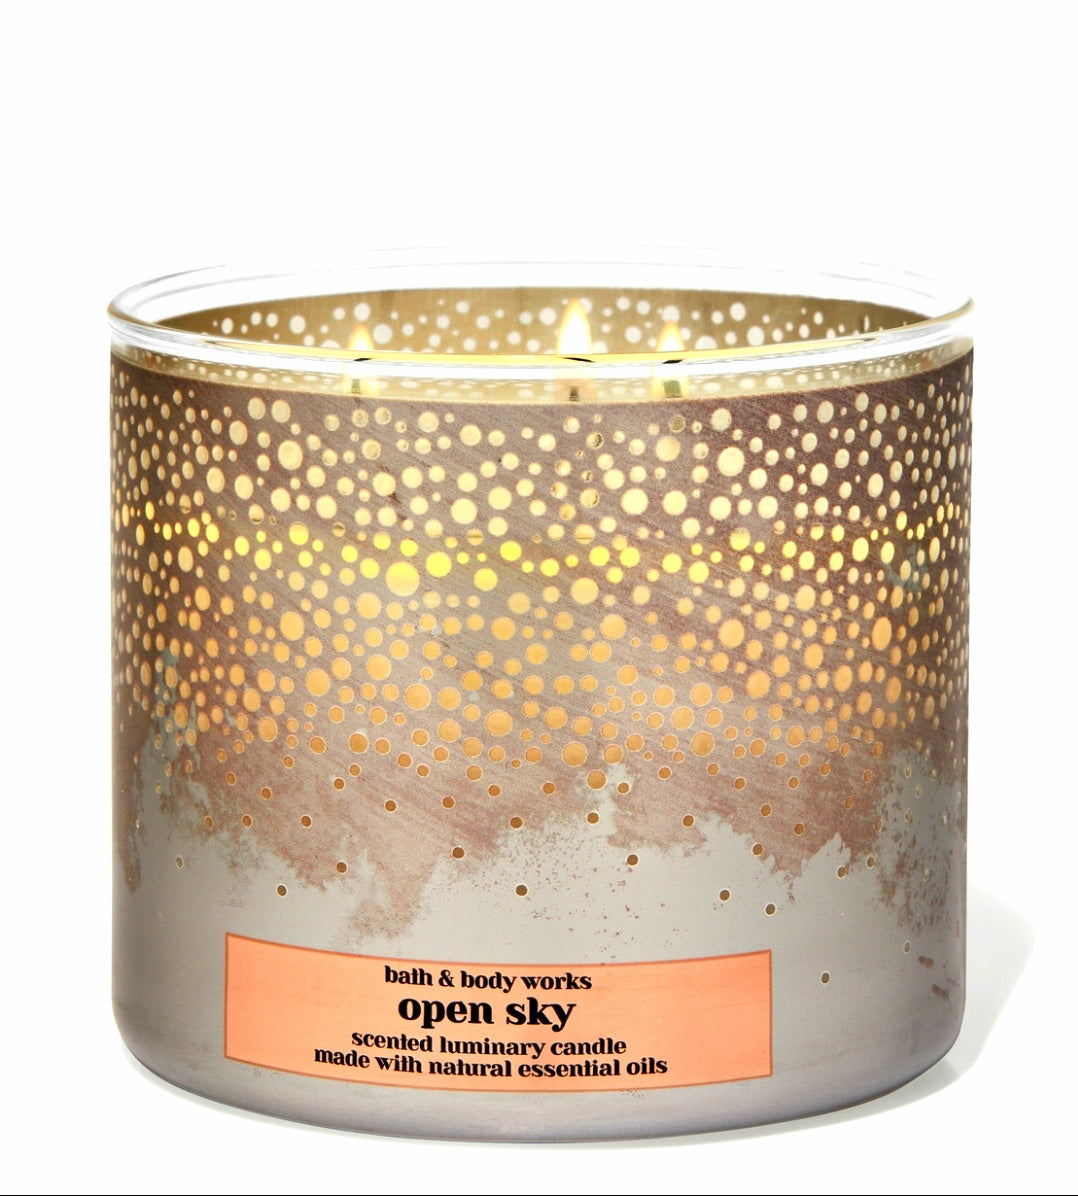 Open Sky 3-wick scented candle